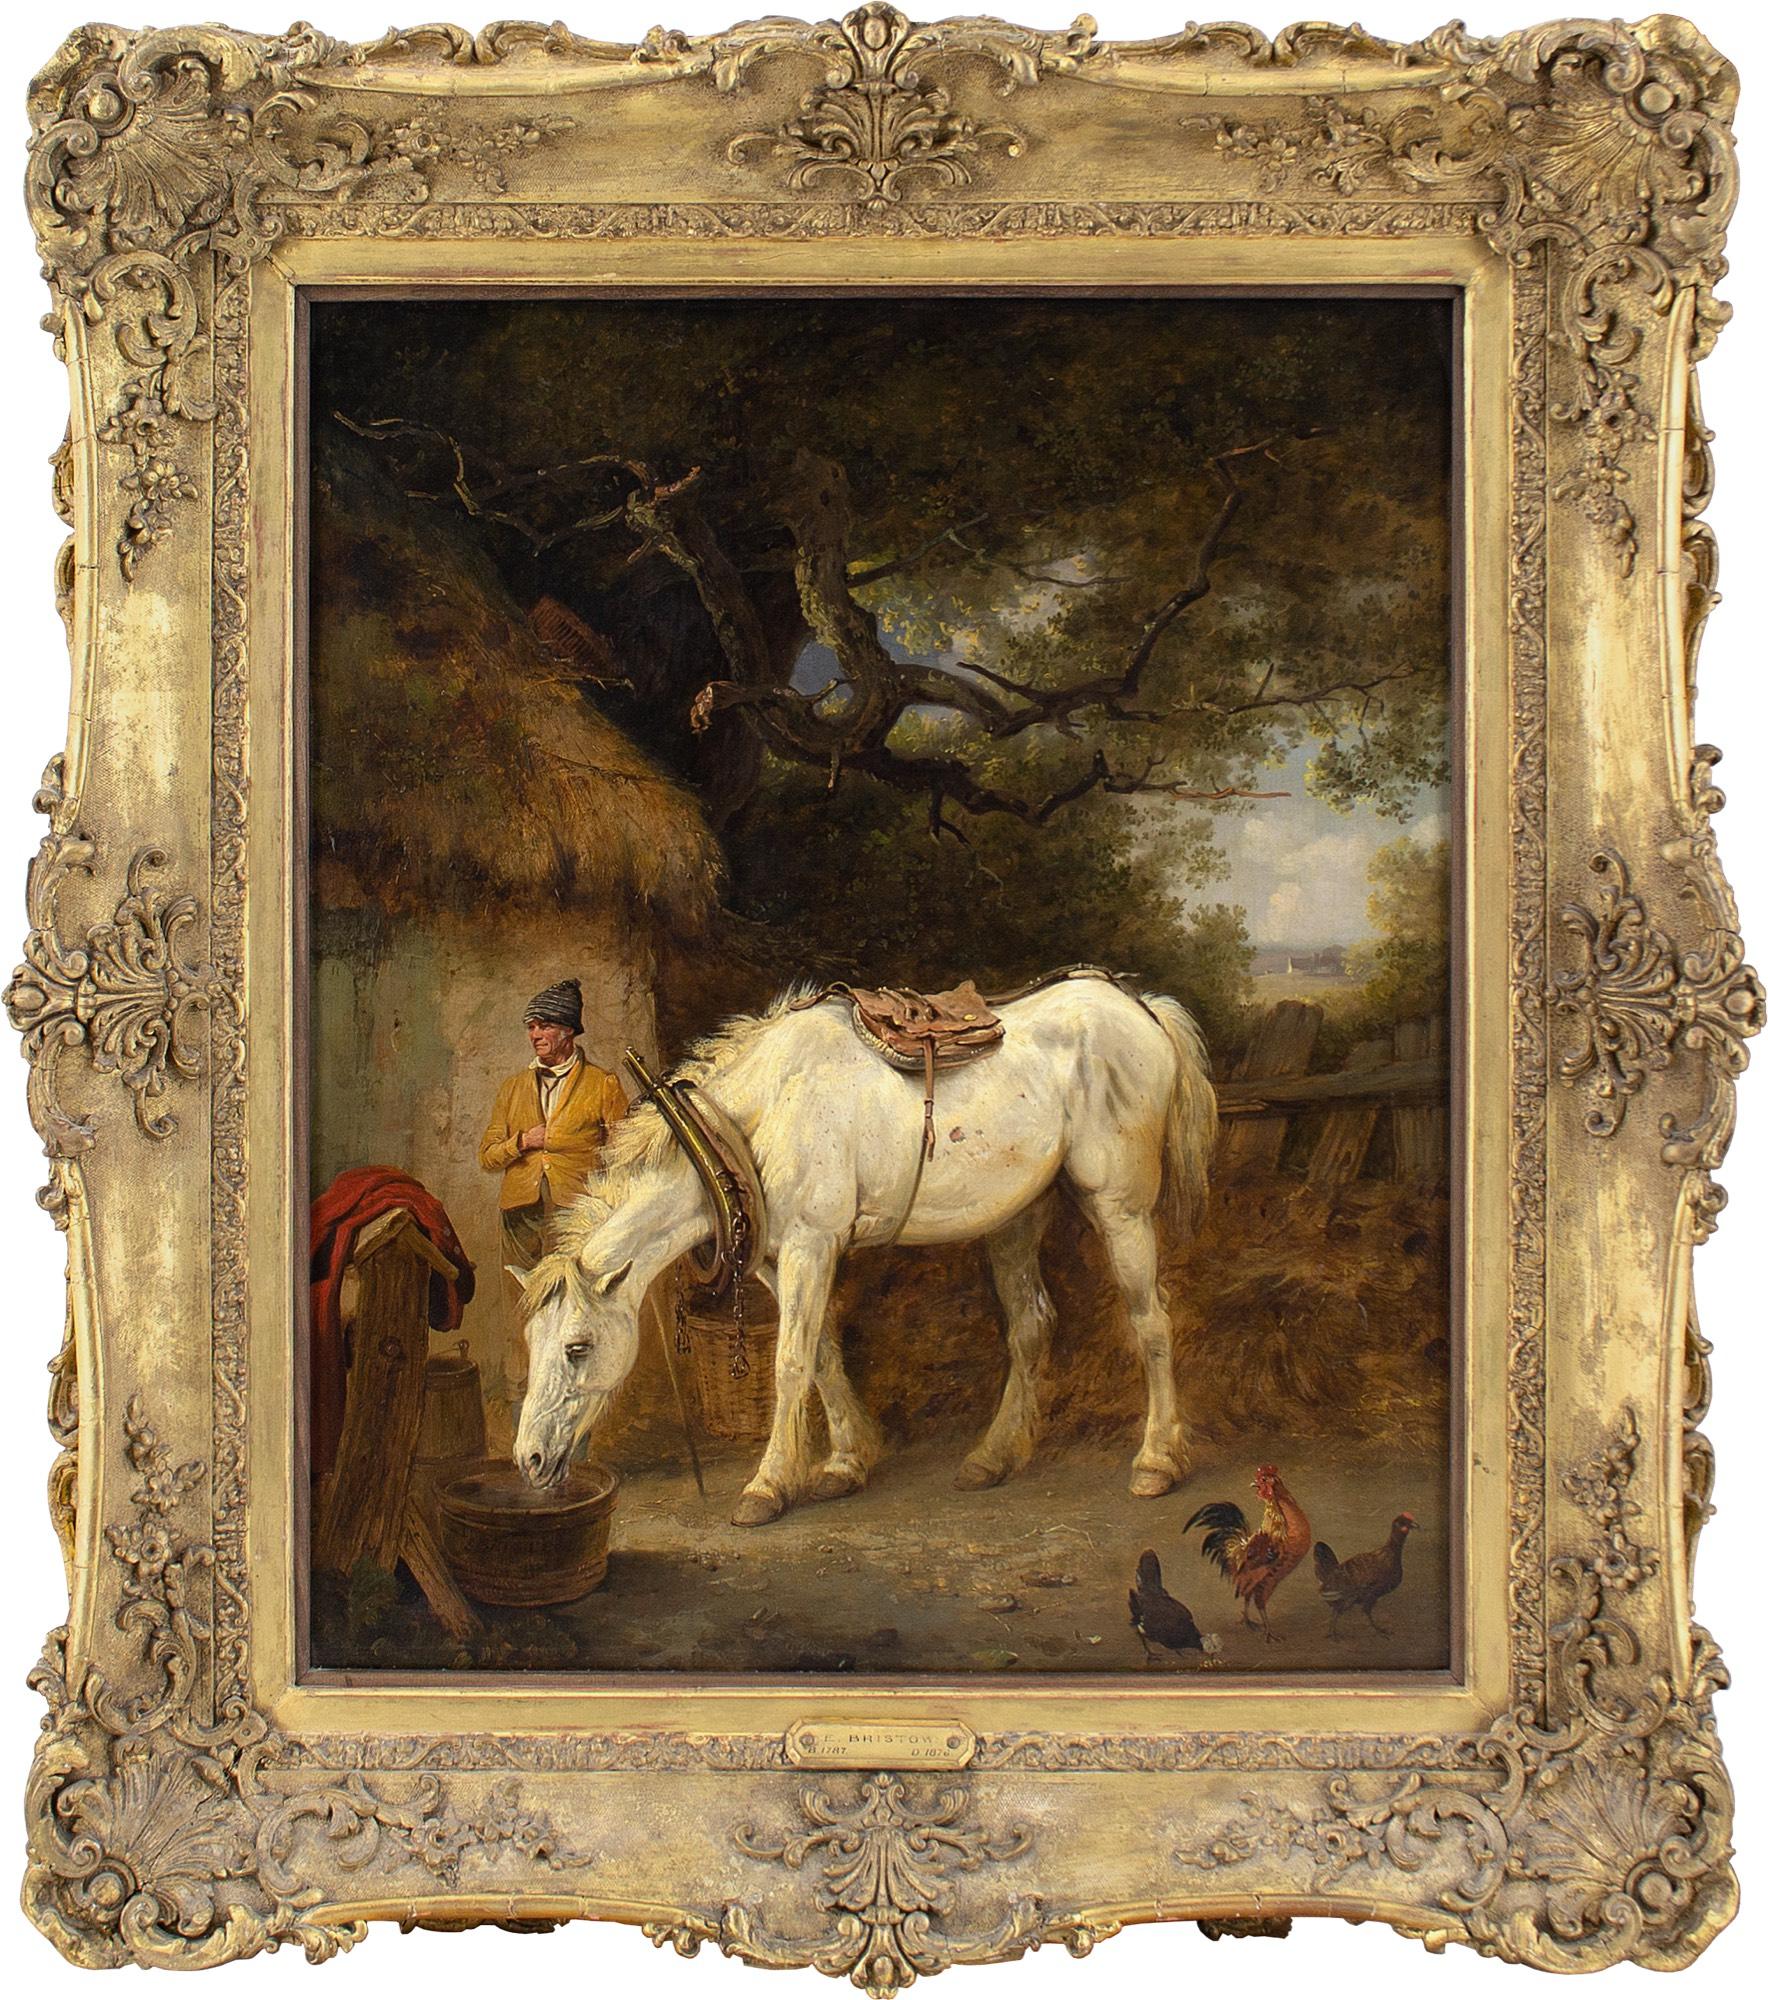 This fine mid-19th-century oil painting by British artist Edmund Bristow (1787-1876) depicts a farmhouse with a saddled white mare taking water while a cockerel looks on. An older man stands alongside, under the eaves of a thatched roof.

Edmund